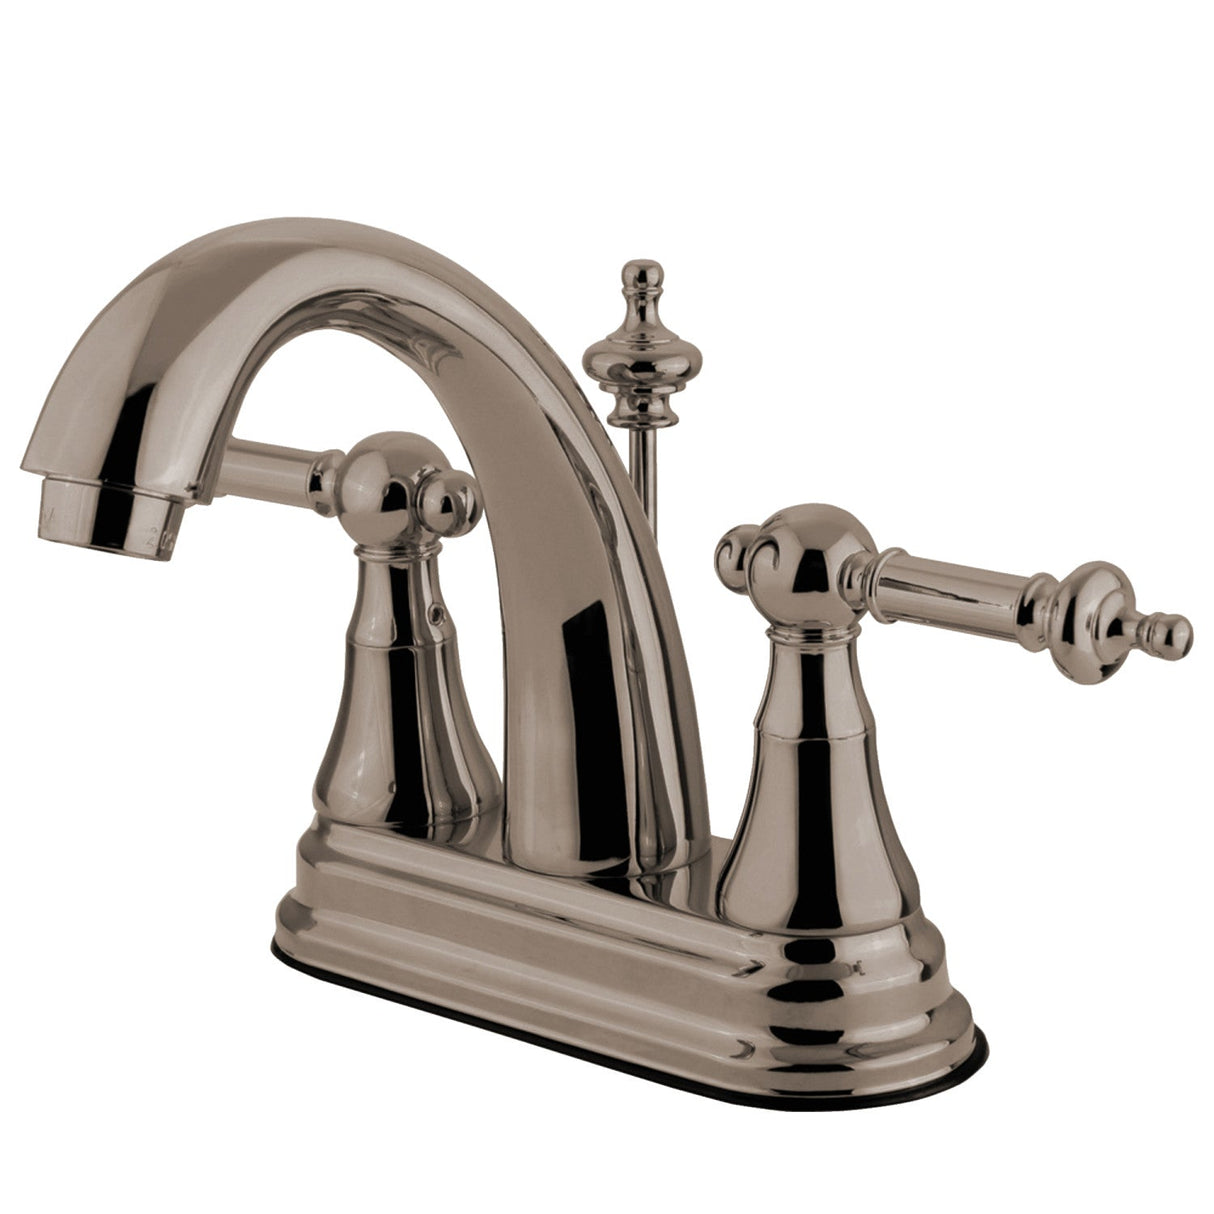 Templeton KS7618TL Two-Handle 3-Hole Deck Mount 4" Centerset Bathroom Faucet with Brass Pop-Up, Brushed Nickel